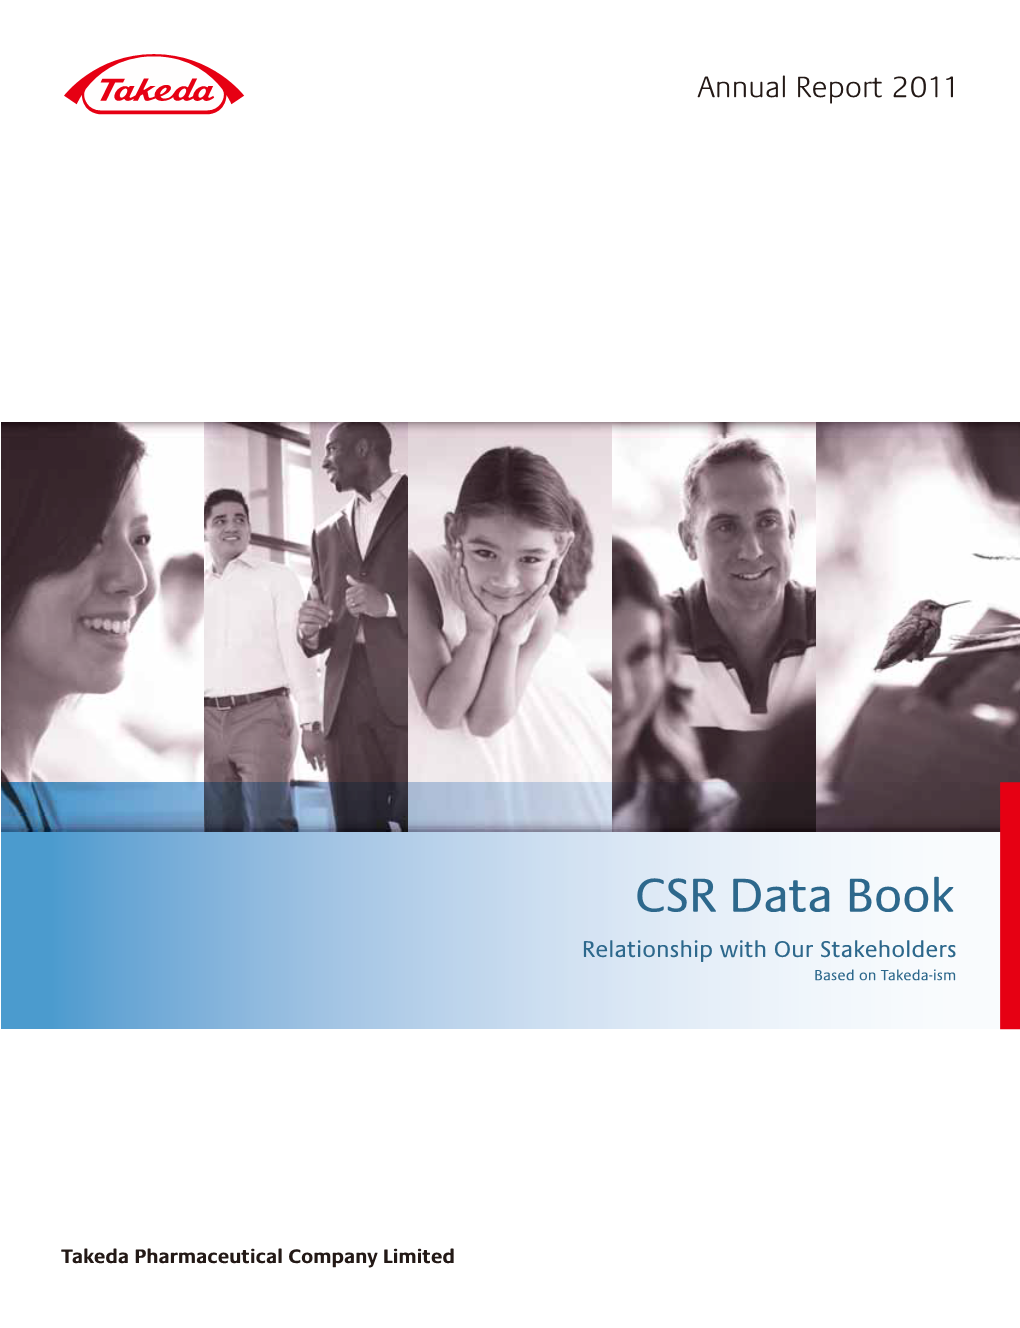 CSR Data Book Relationship with Our Stakeholders Based on Takeda-Ism